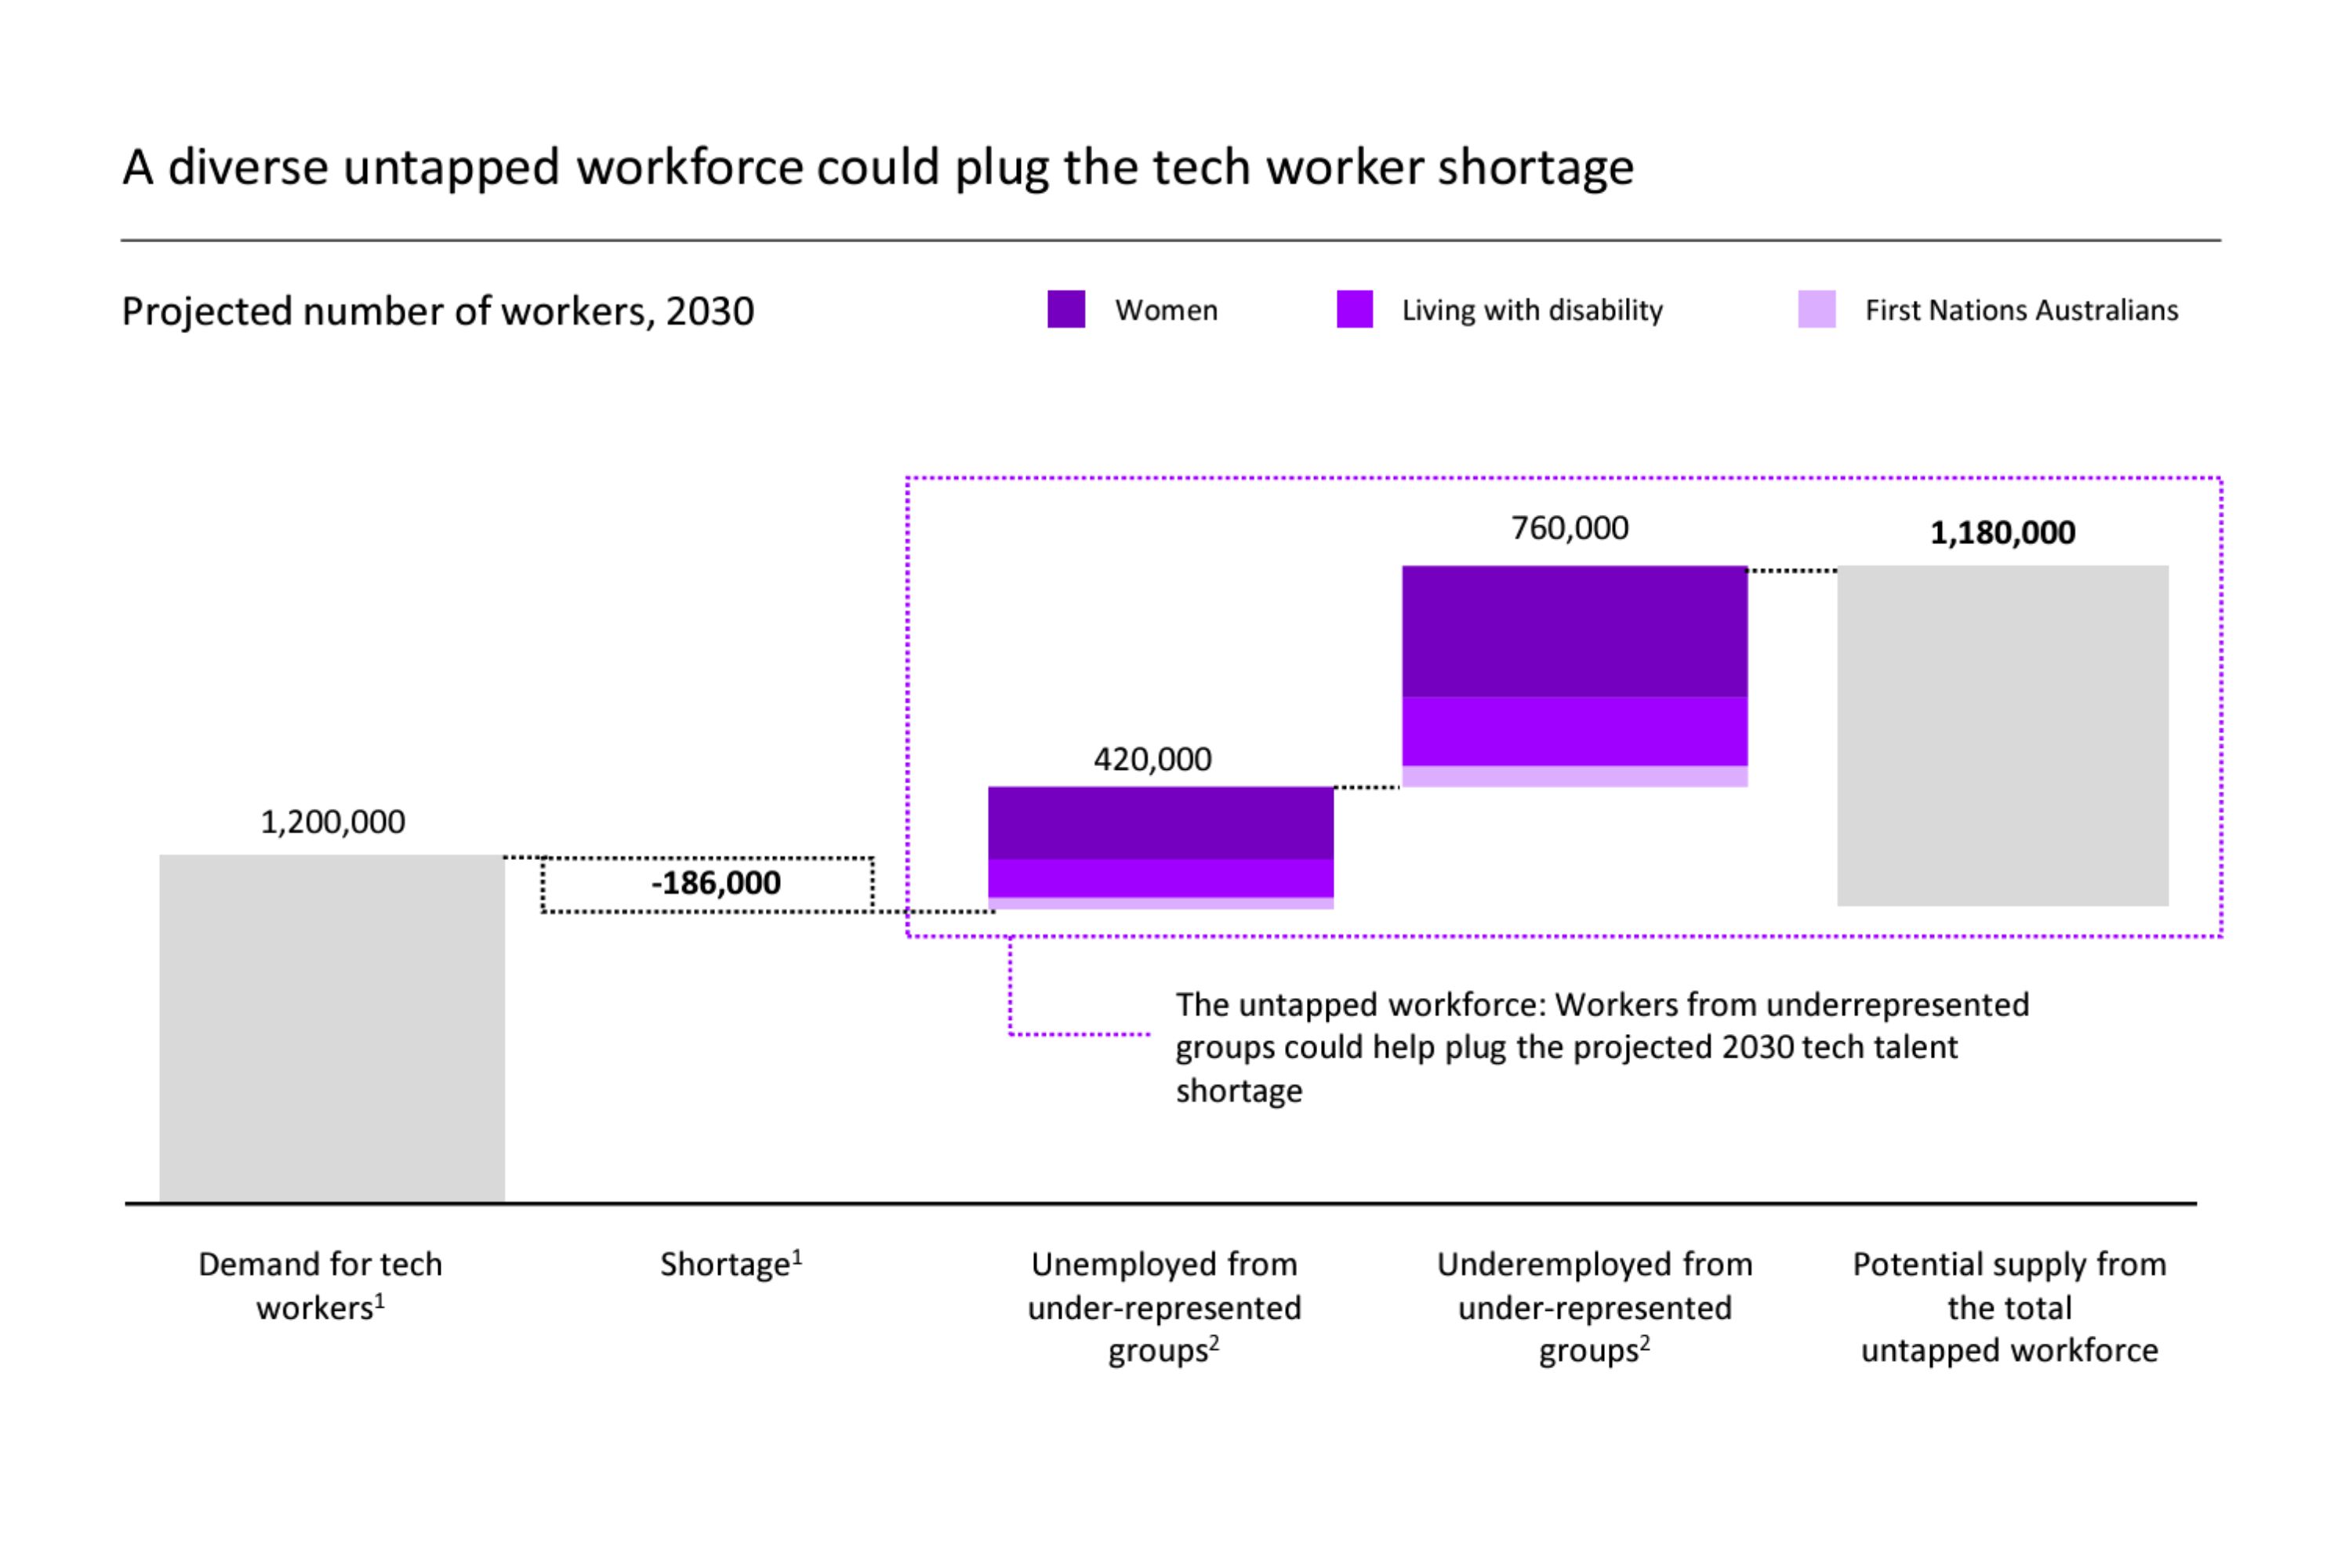 An infographic displaying how an diverse untapped workforce can resolve tech worker shortage.